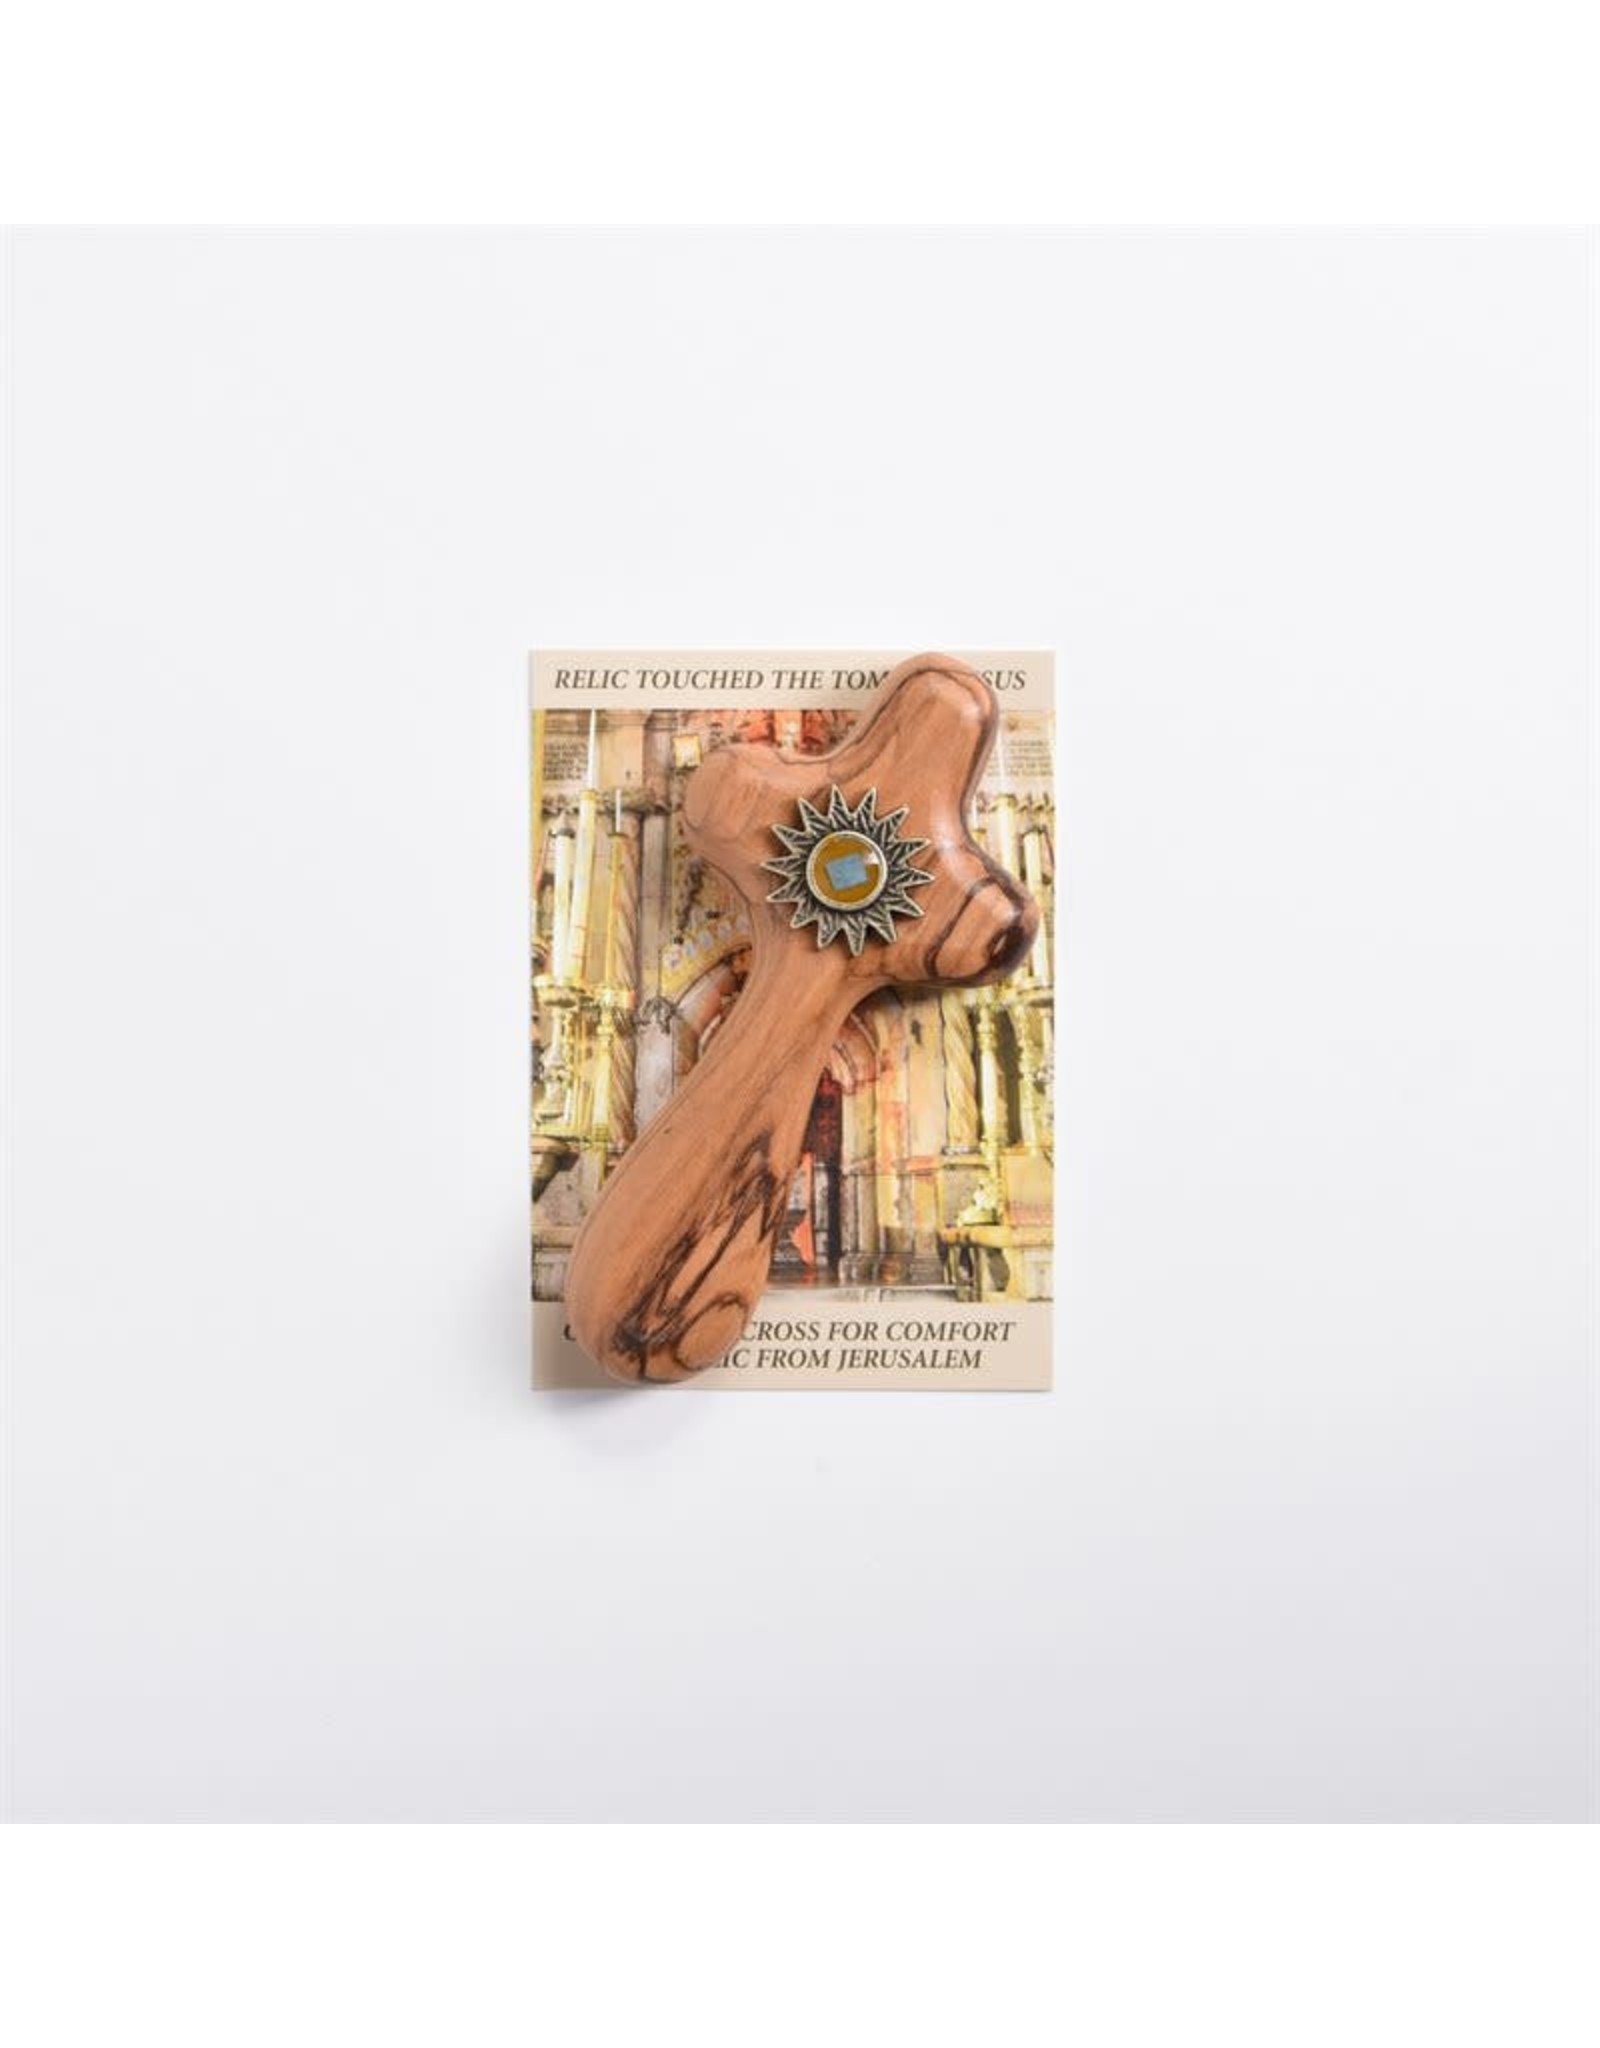 Shomali Olive Wood Comfort Cross w/Relic from Holy Land (4")